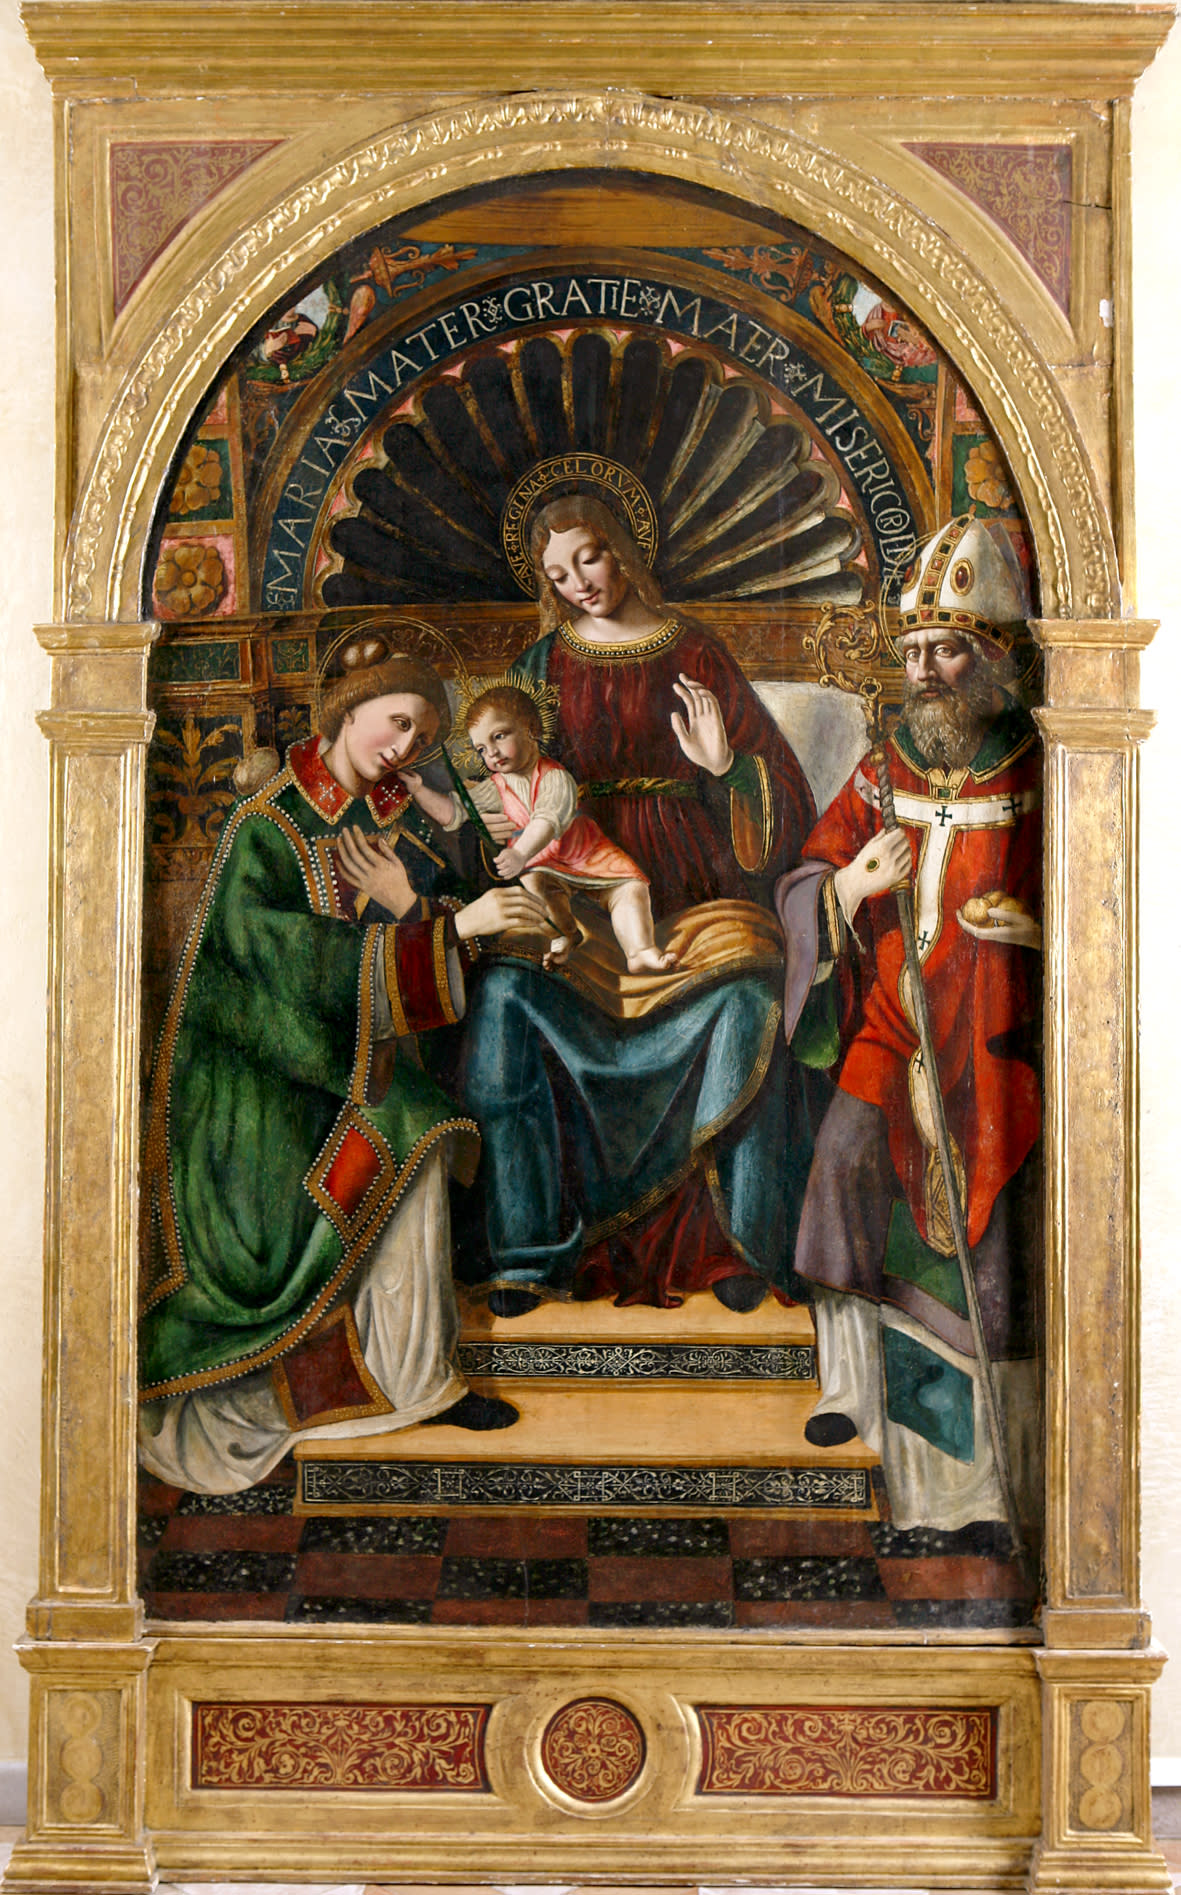 The Madonna and Child with Saints Stephen and Nicholas of Bari